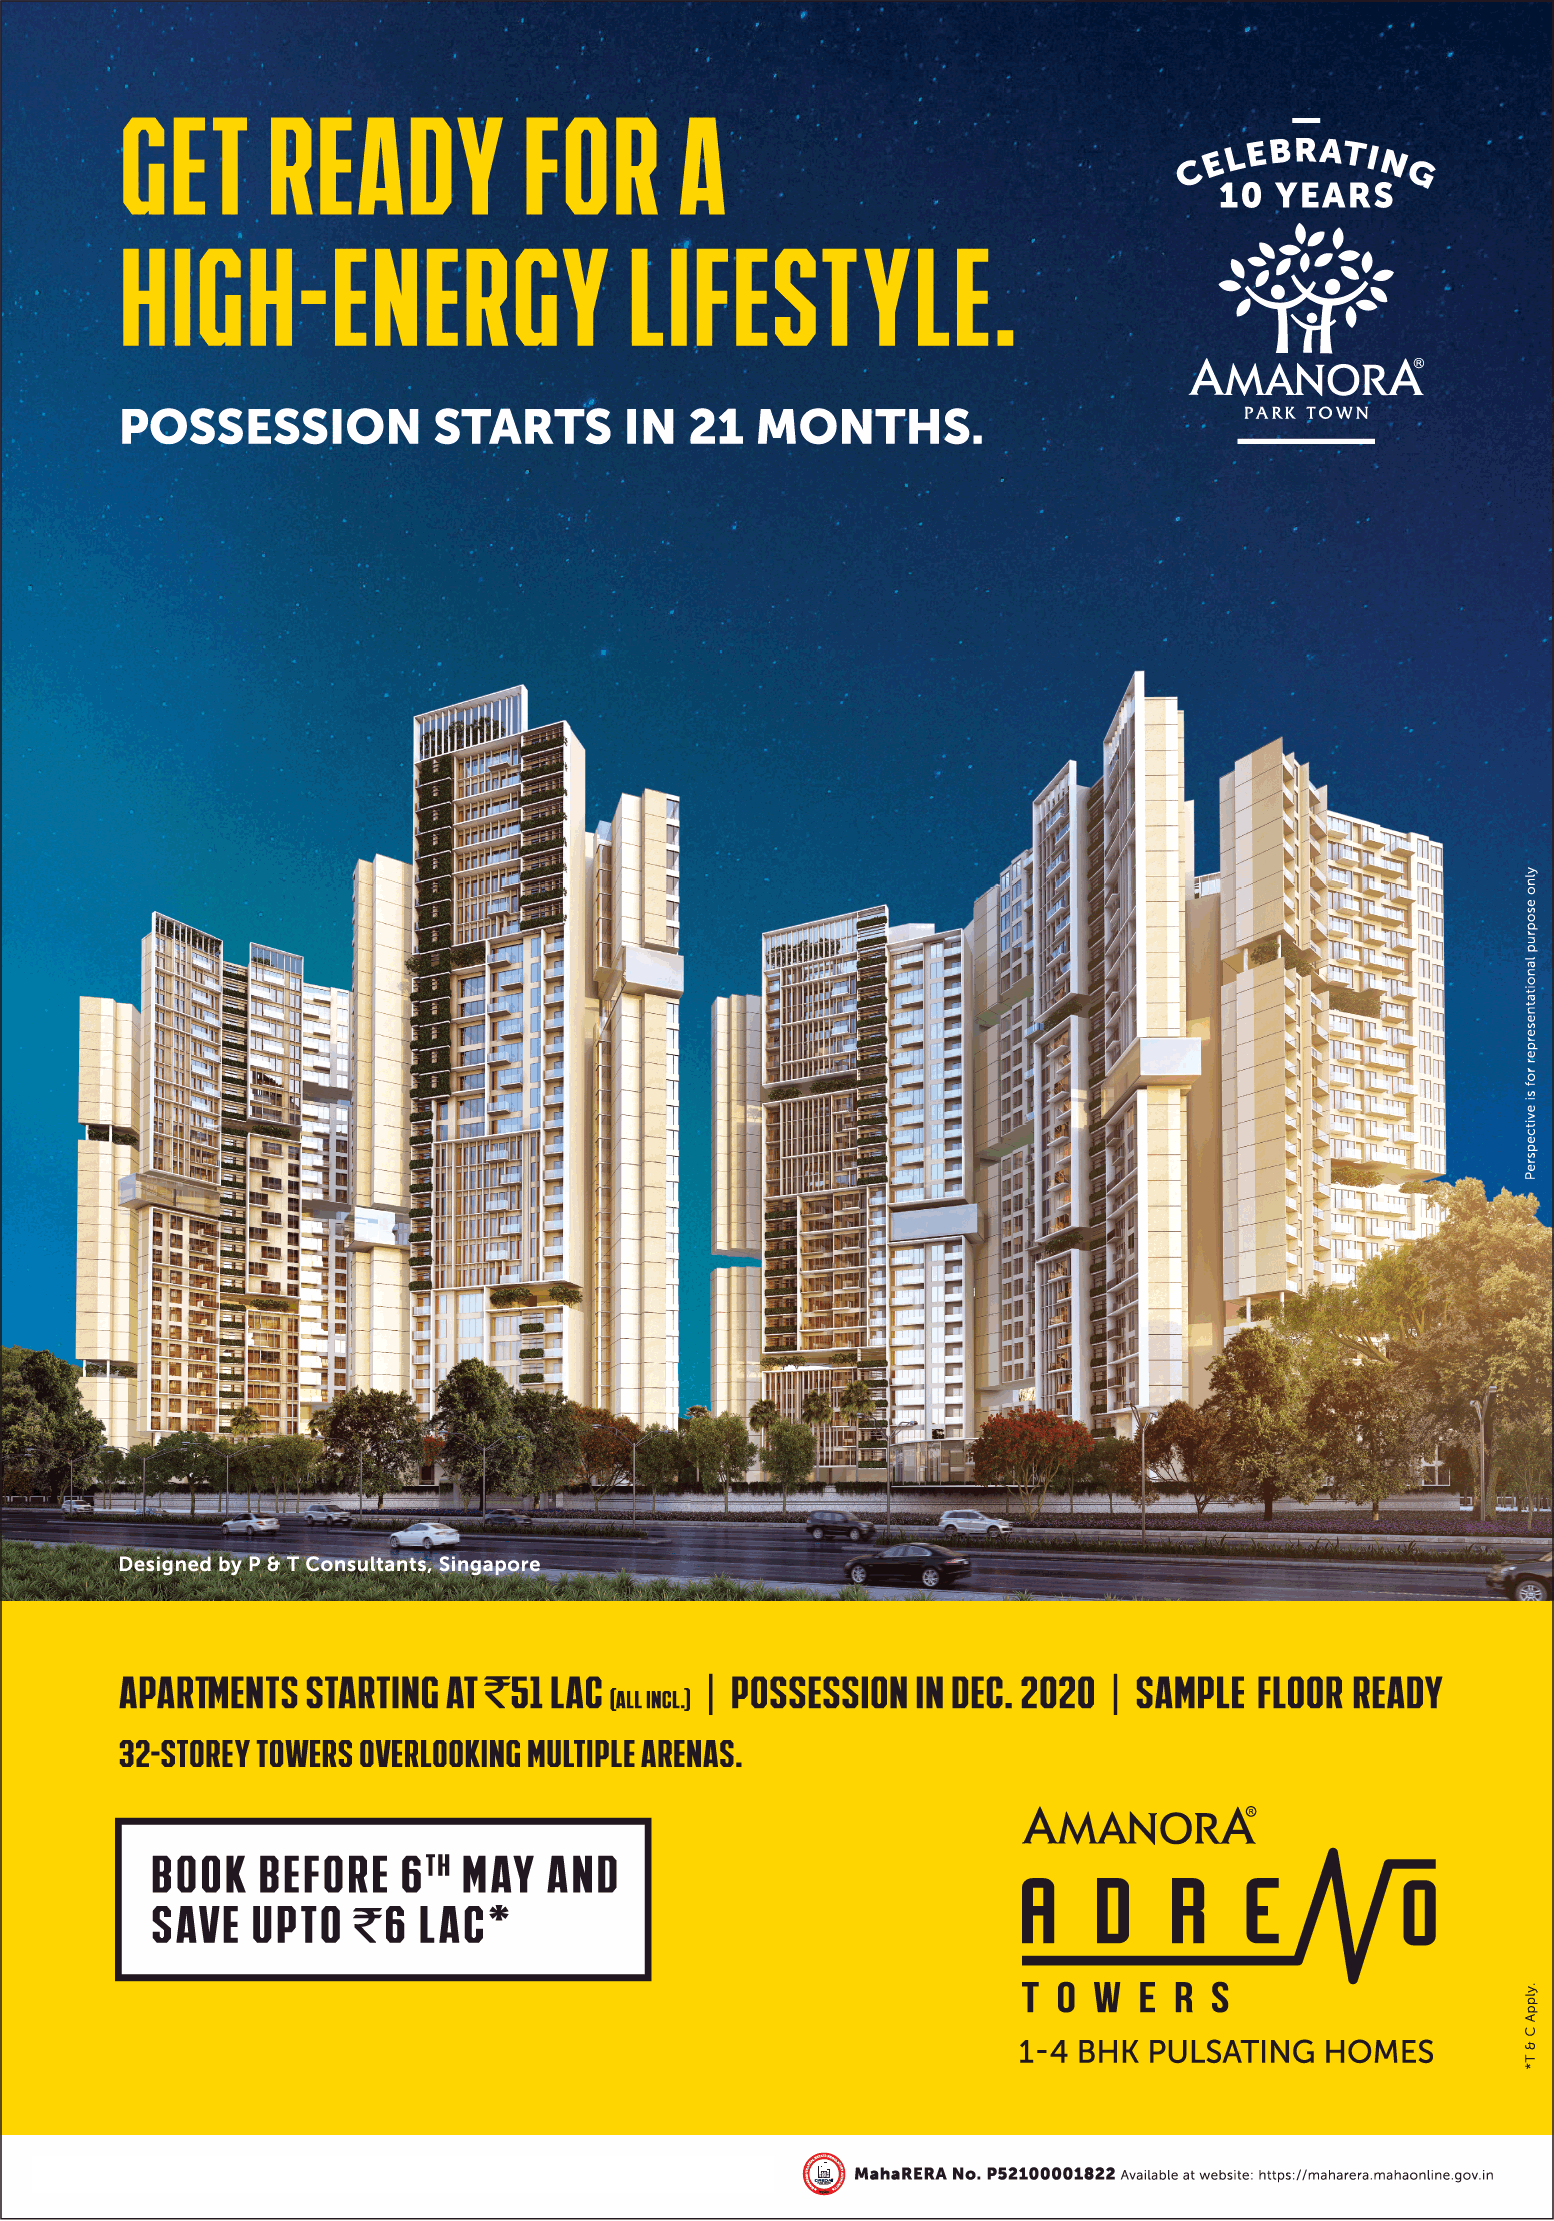 Book before 6th May & save upto Rs. 6 lakhs at  Amanora Park Town in Pune